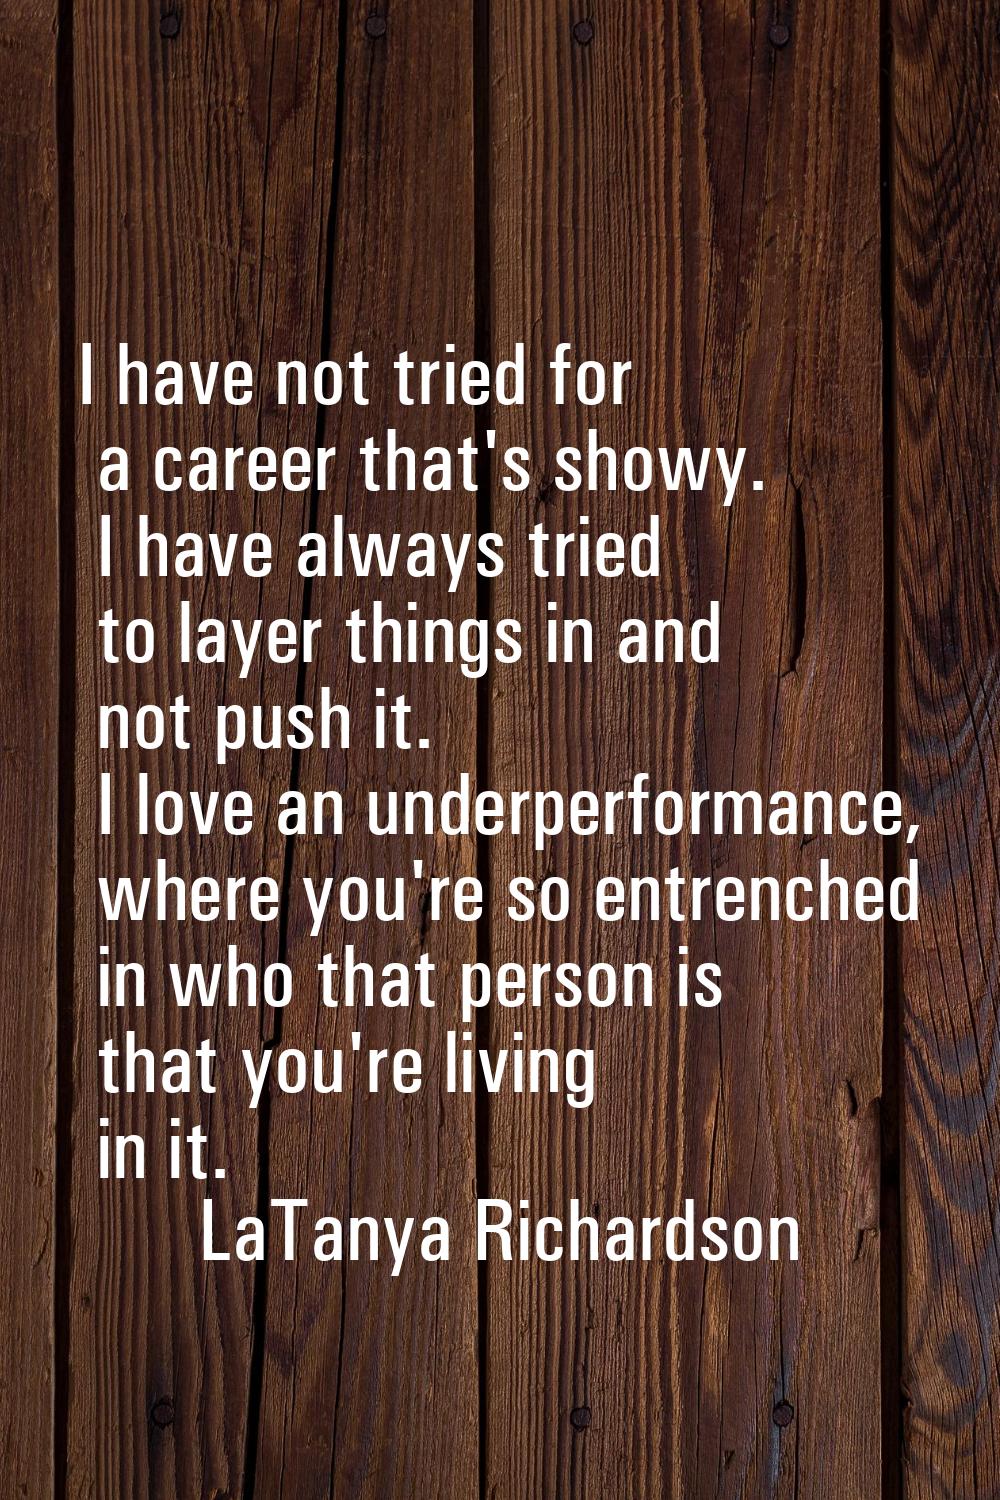 I have not tried for a career that's showy. I have always tried to layer things in and not push it.